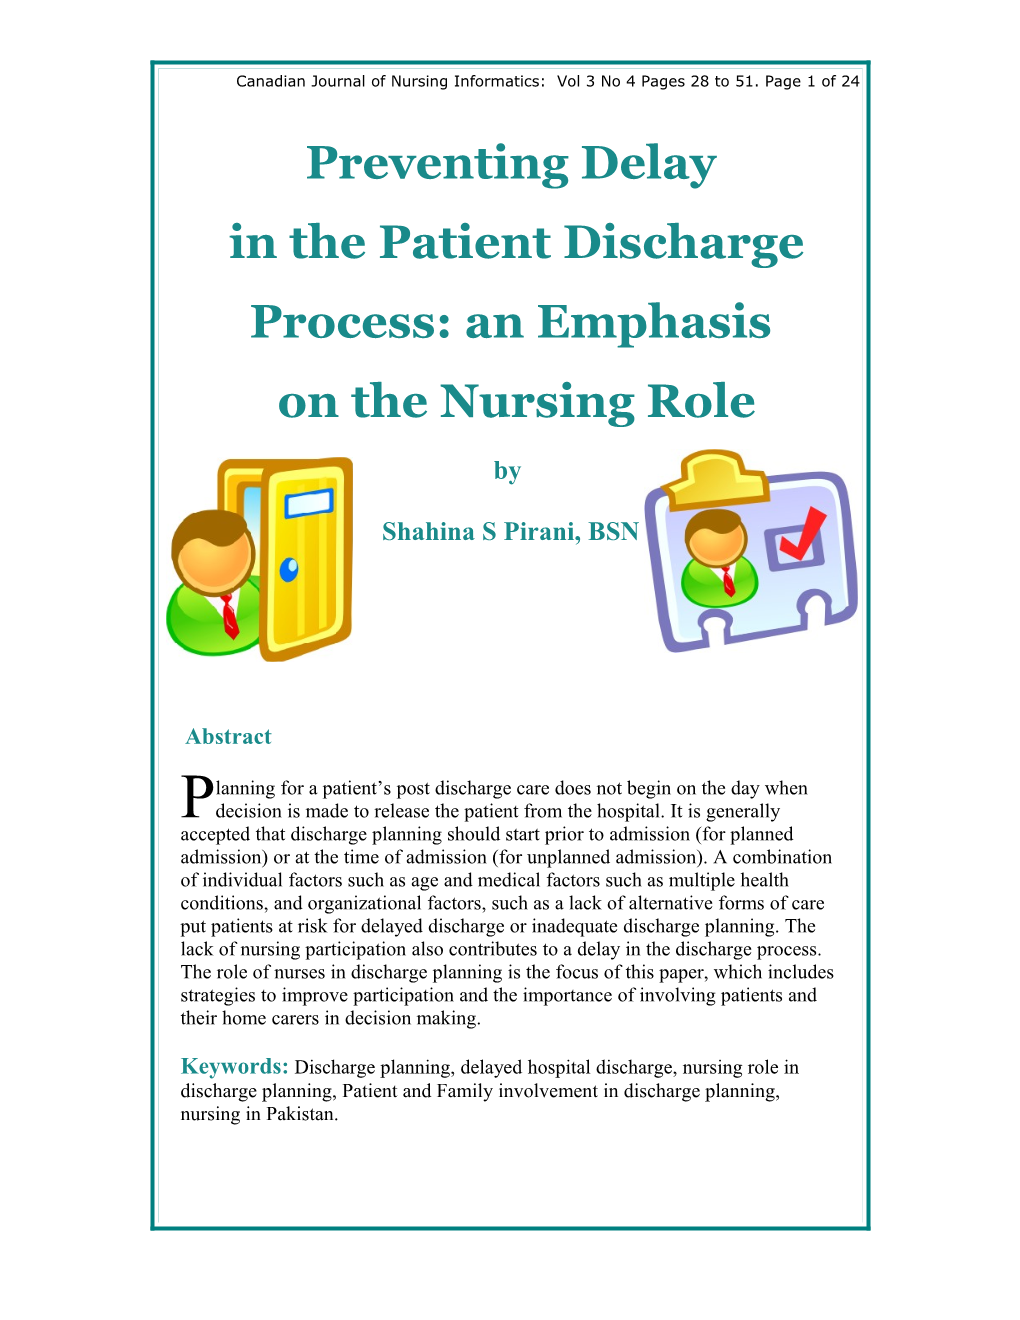 Preventing Delay in the Patient Discharge Process: an Emphasis on the Nursing Role